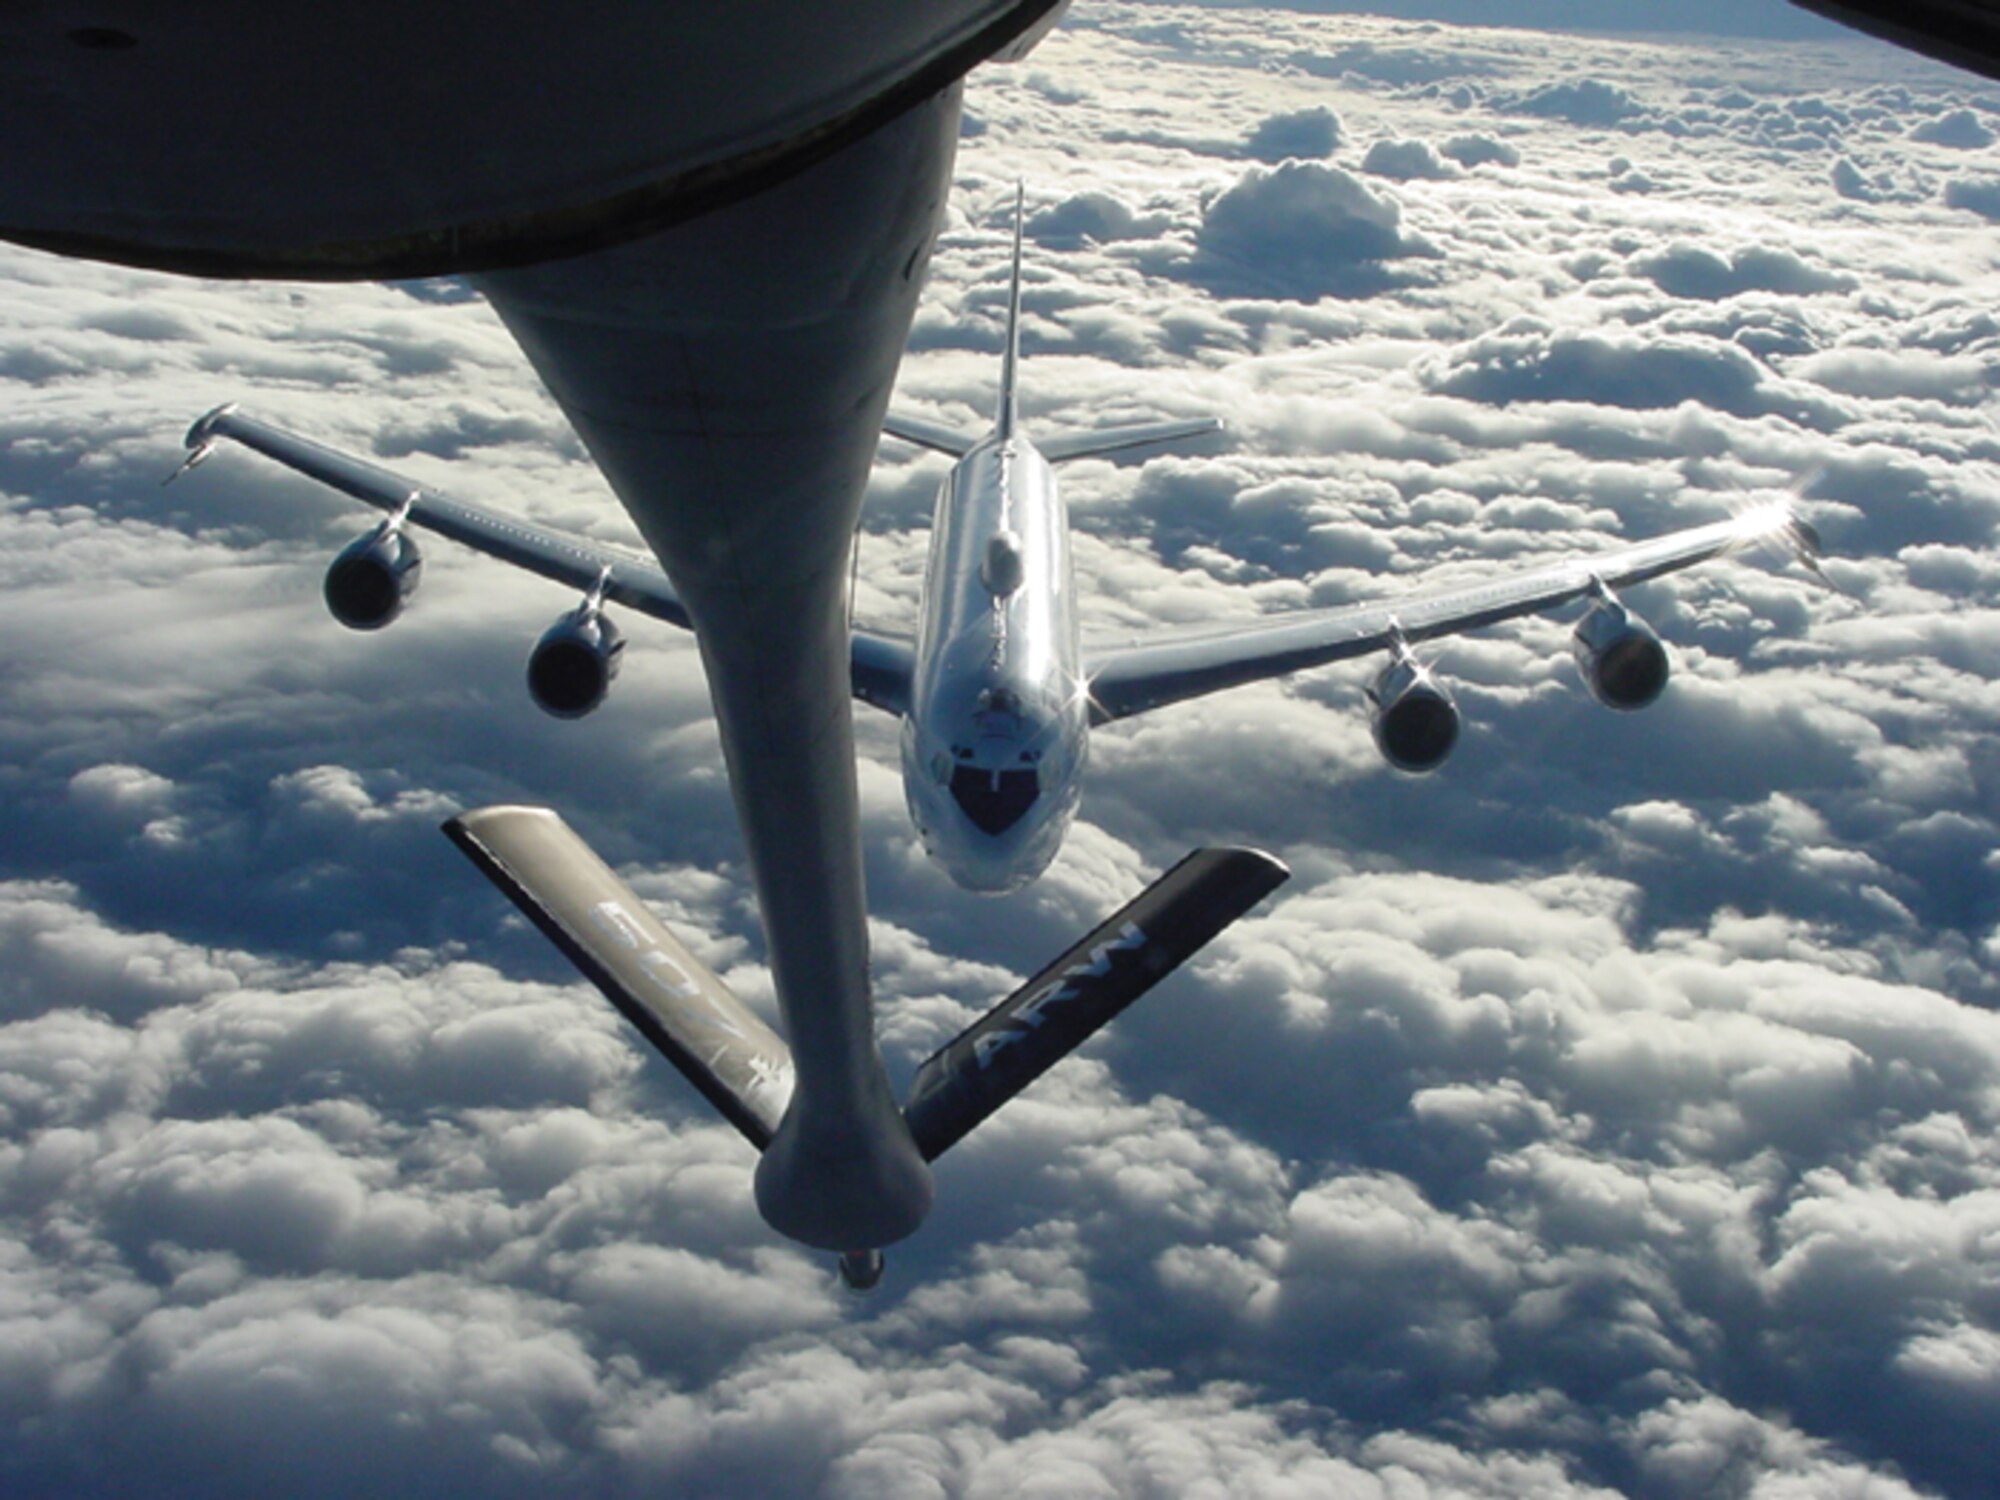 The 507th Air Refueling Wing, Air Force Reserve, is accepting pilot applications from both experienced pilots and those seeking to be selected for undergraduate pilot training.  The 507th ARW flies the KC-135R Stratotanker and performs air refueling misions in support of national defense.